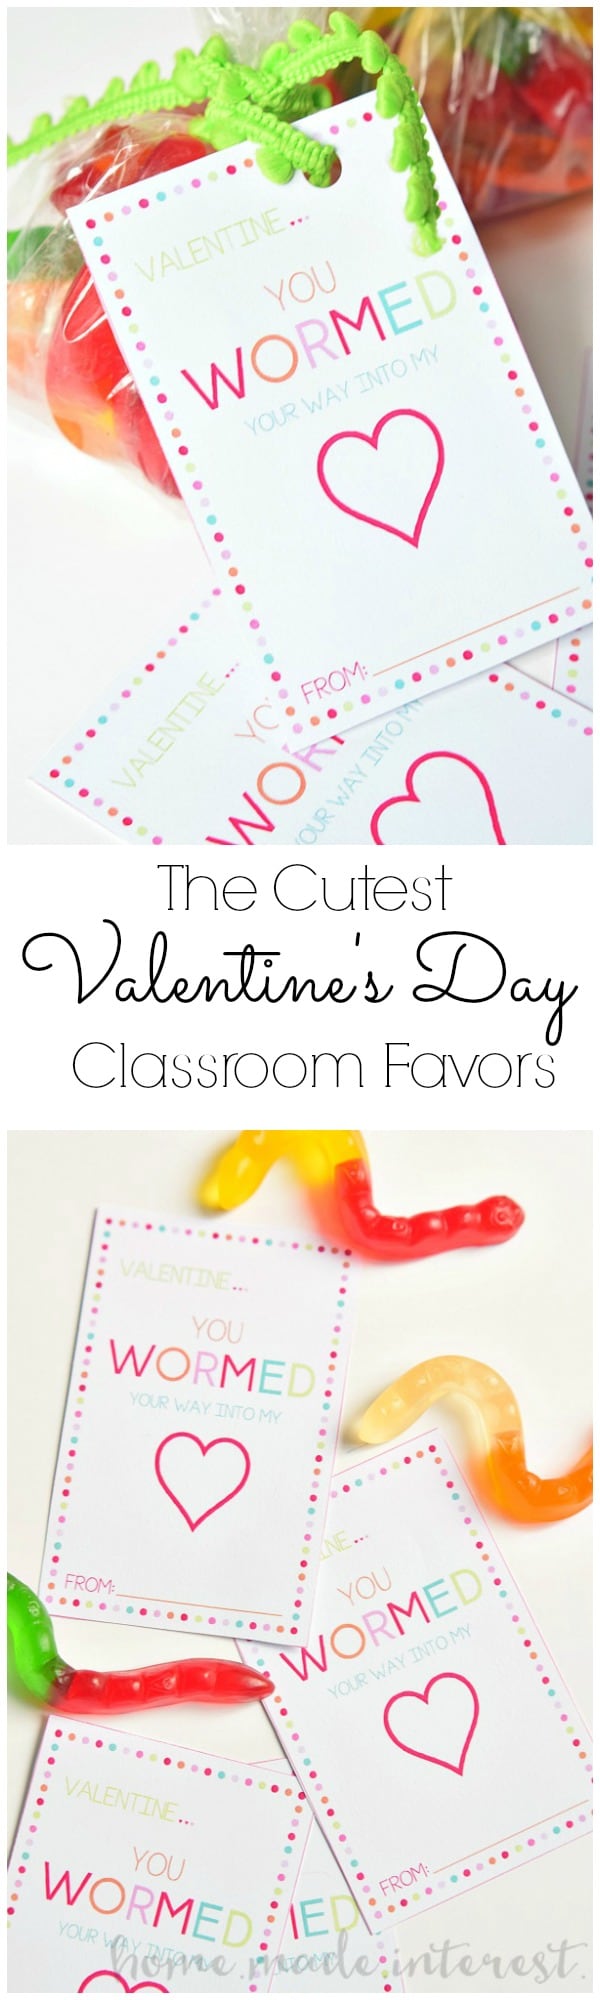 These Valentine’s Day Classroom Favors are the cutest! Print out the free printable Valentine’s Day card and put a smile on every kid’s face with this gummy worm valentine. 